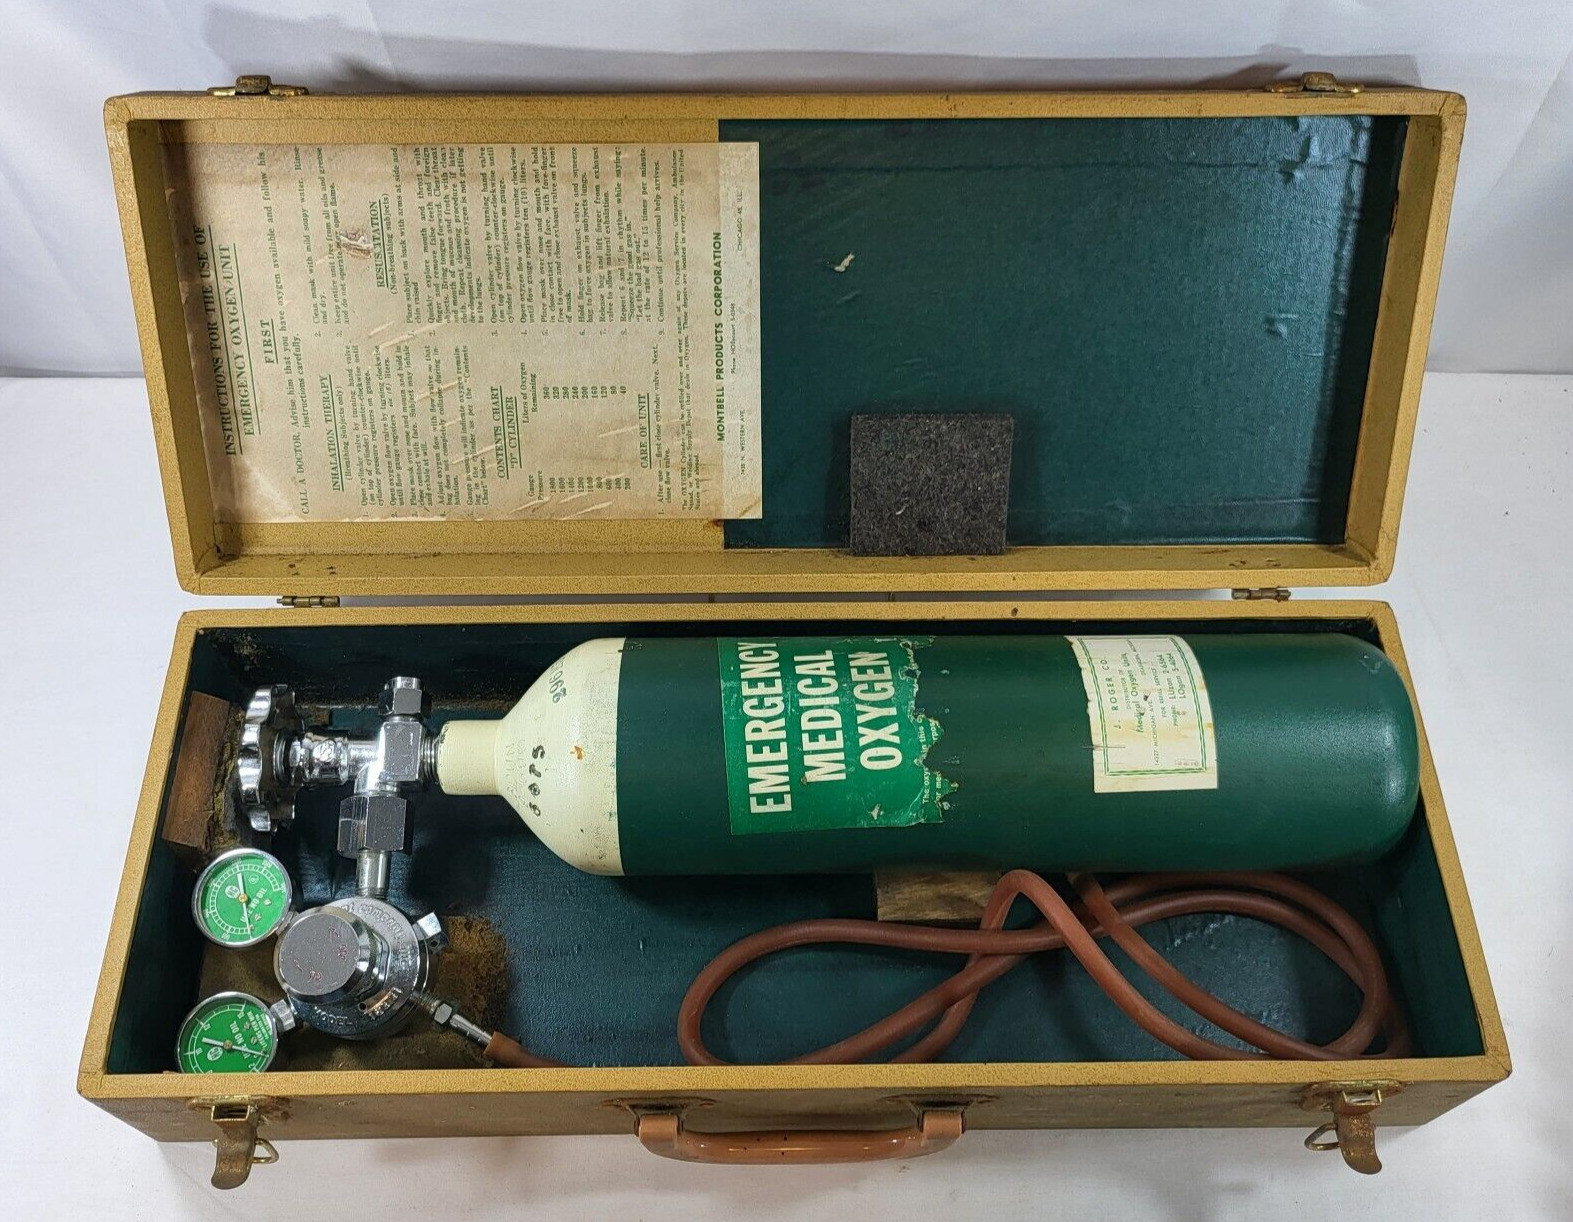 1959 Emergency Medical Oxygen Tank with Regulator & Case - Montbell Products Co.